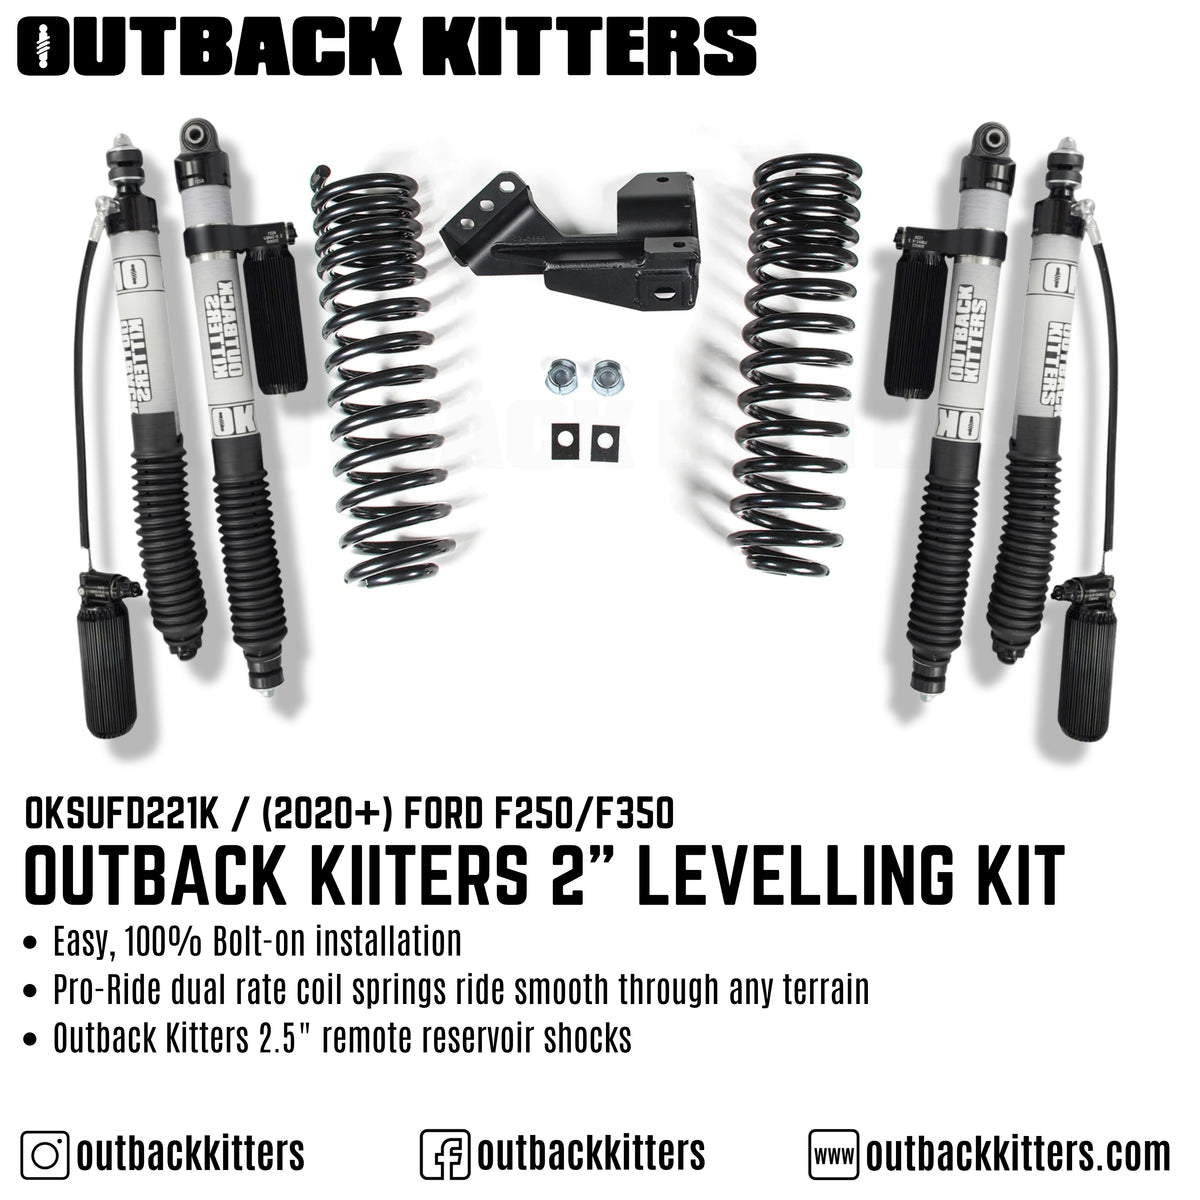 Outback Kitters 2" Levelling Kit for 2020+ Ford F250/F350 - Outback Kitters